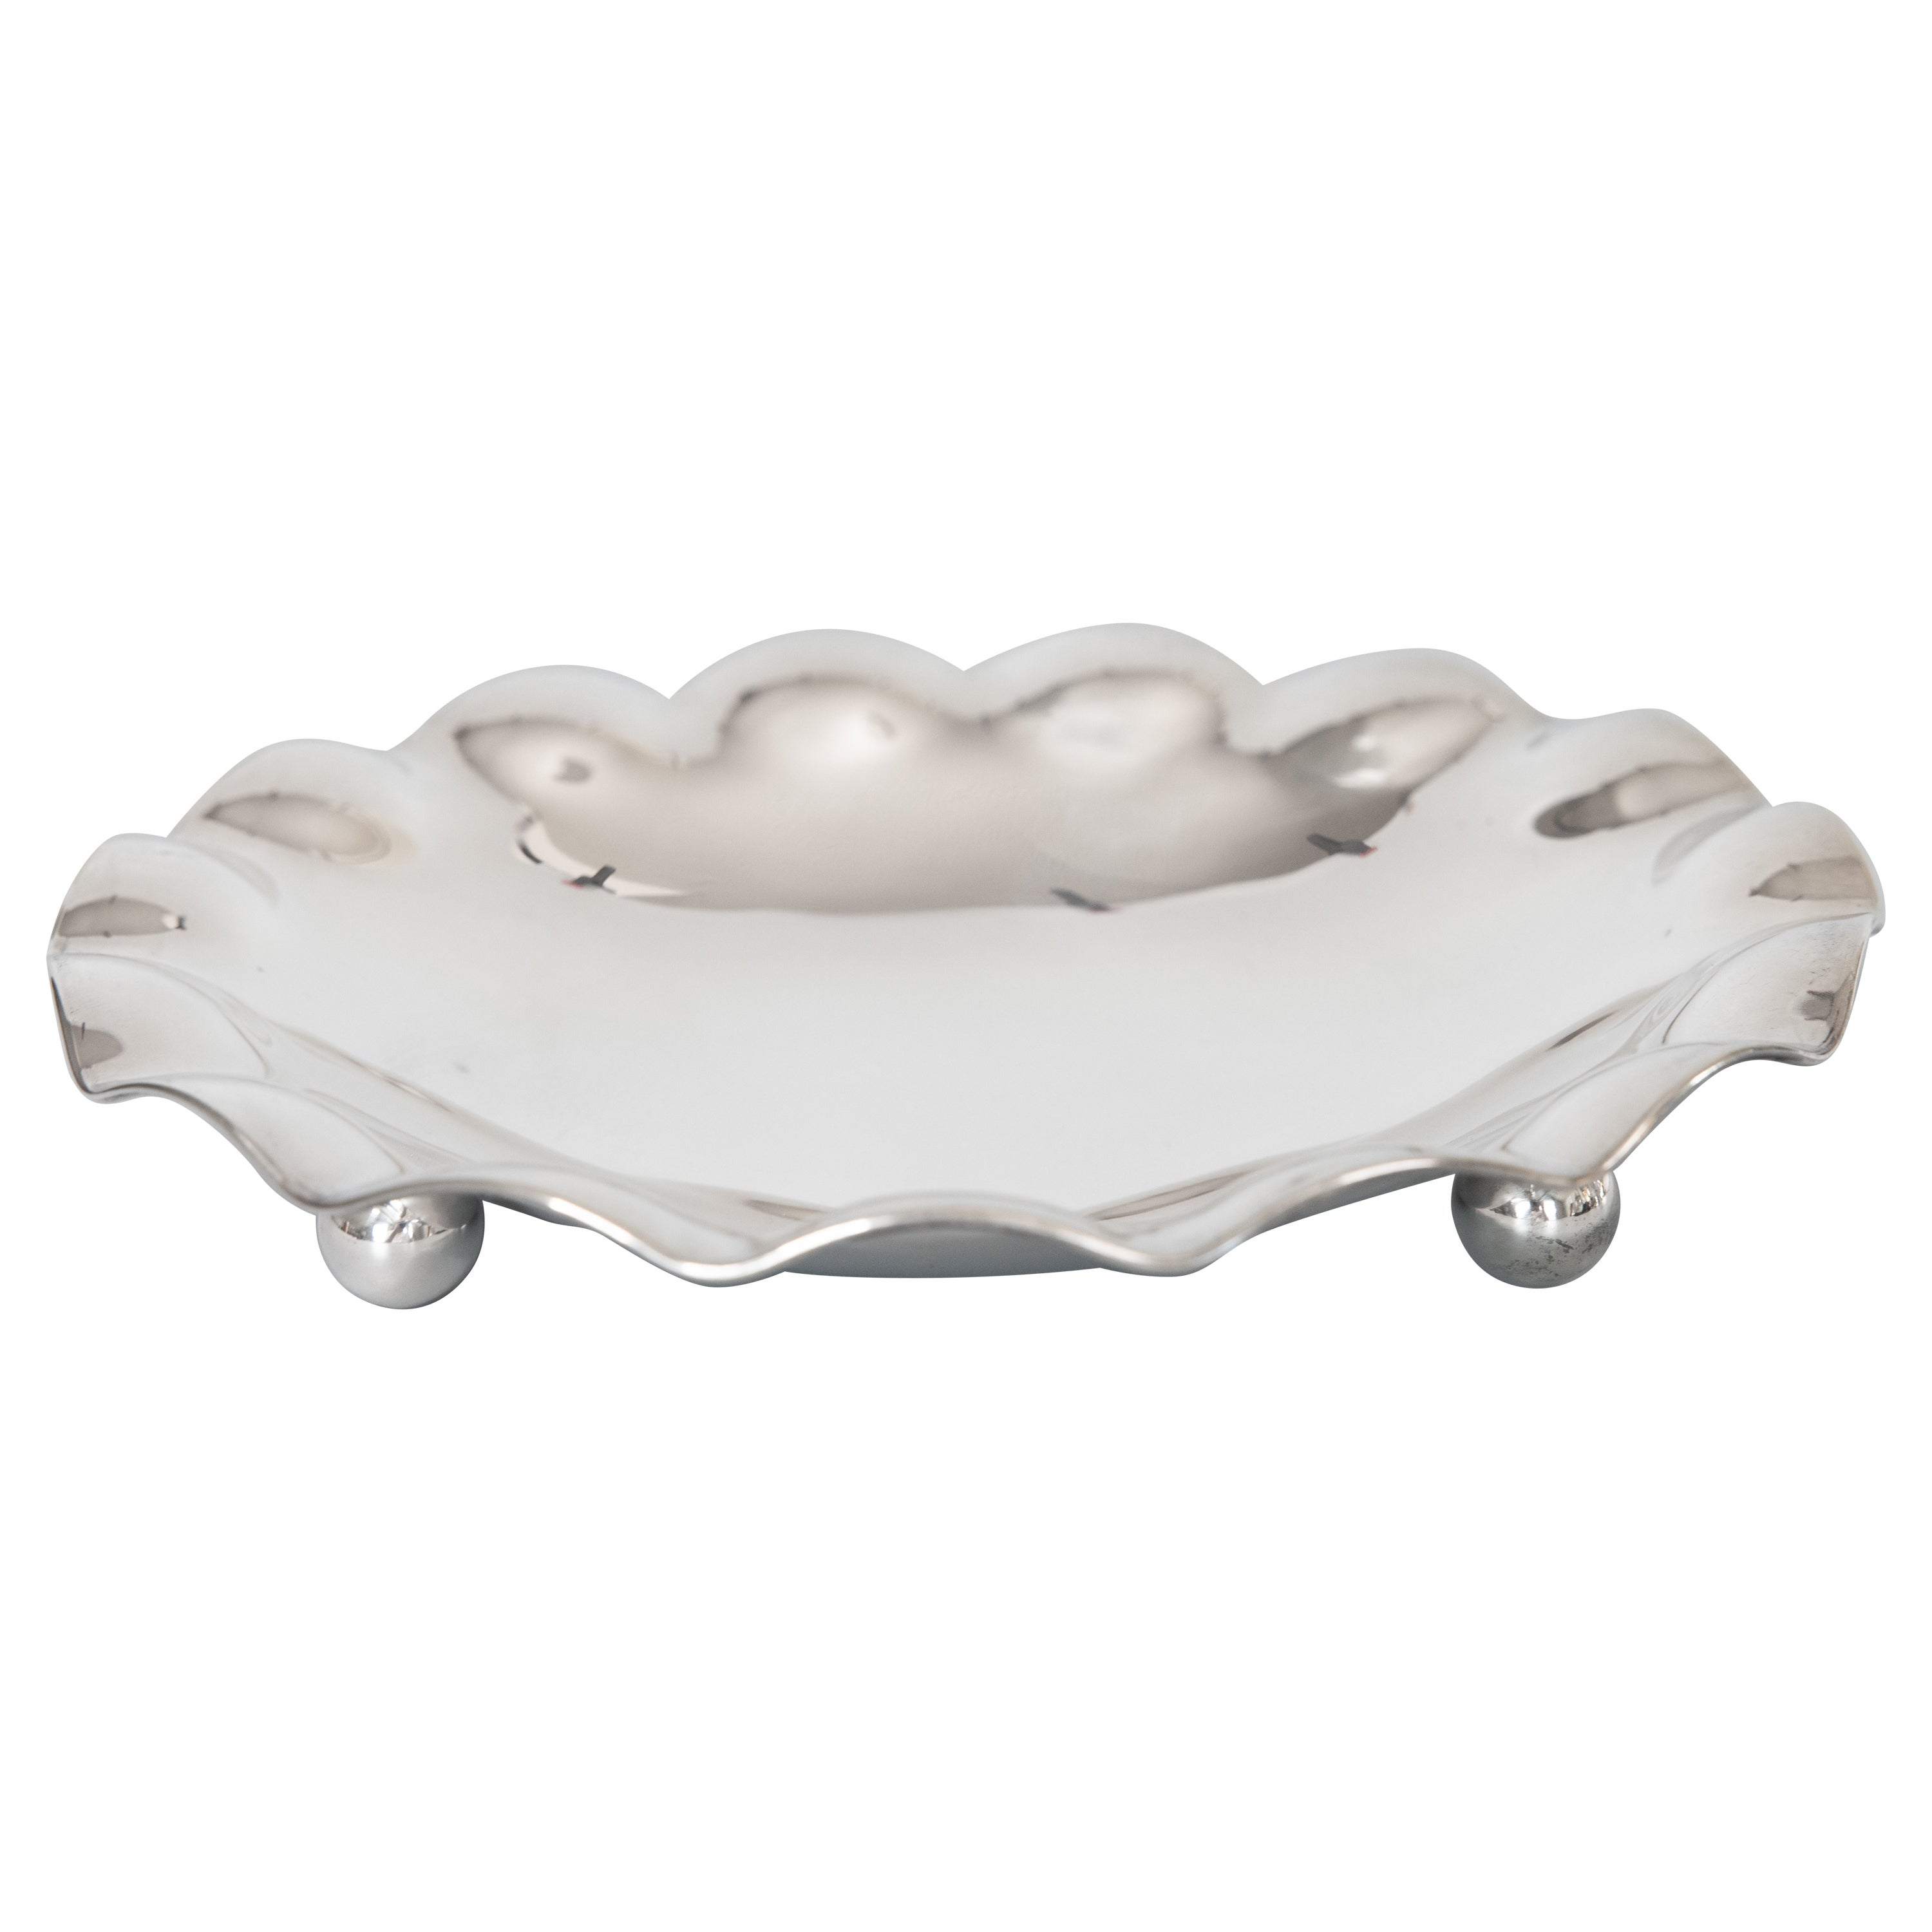 Mid-20th Century Italian Silver Plate Footed Scalloped Tray or Shallow Bowl For Sale